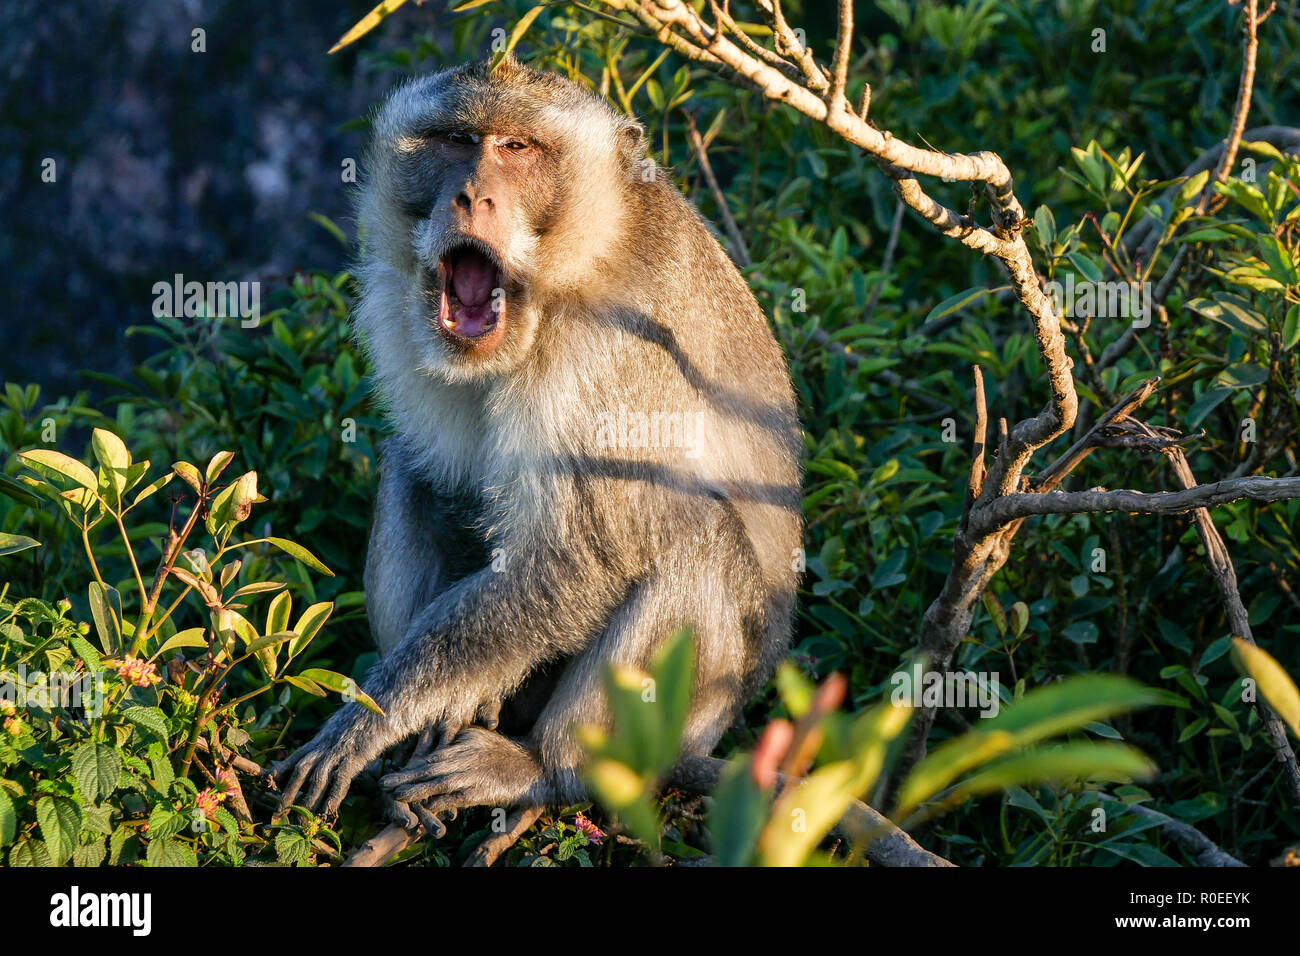 A yawning monkey in Indonesia. Stock Photo